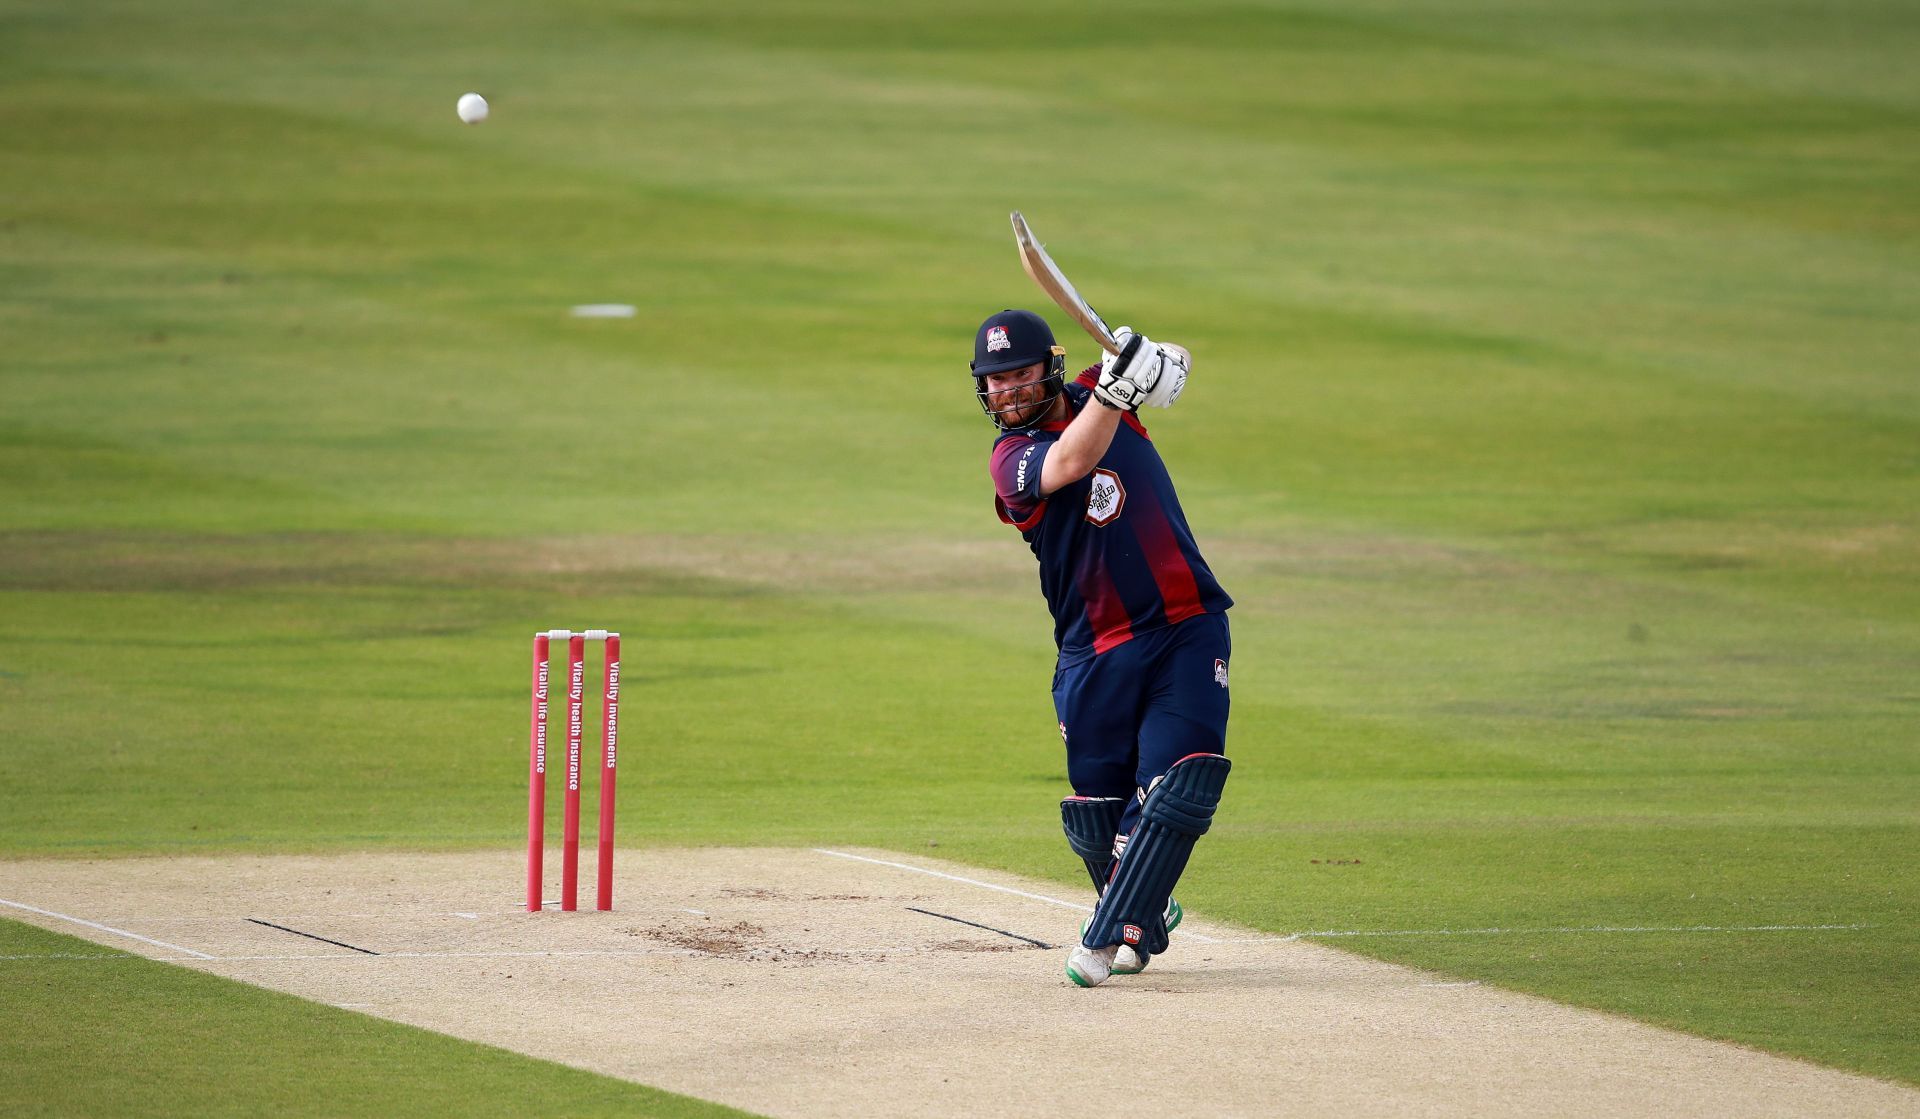 Paul Stirling in action during the T20 Vitality Blast 2020.